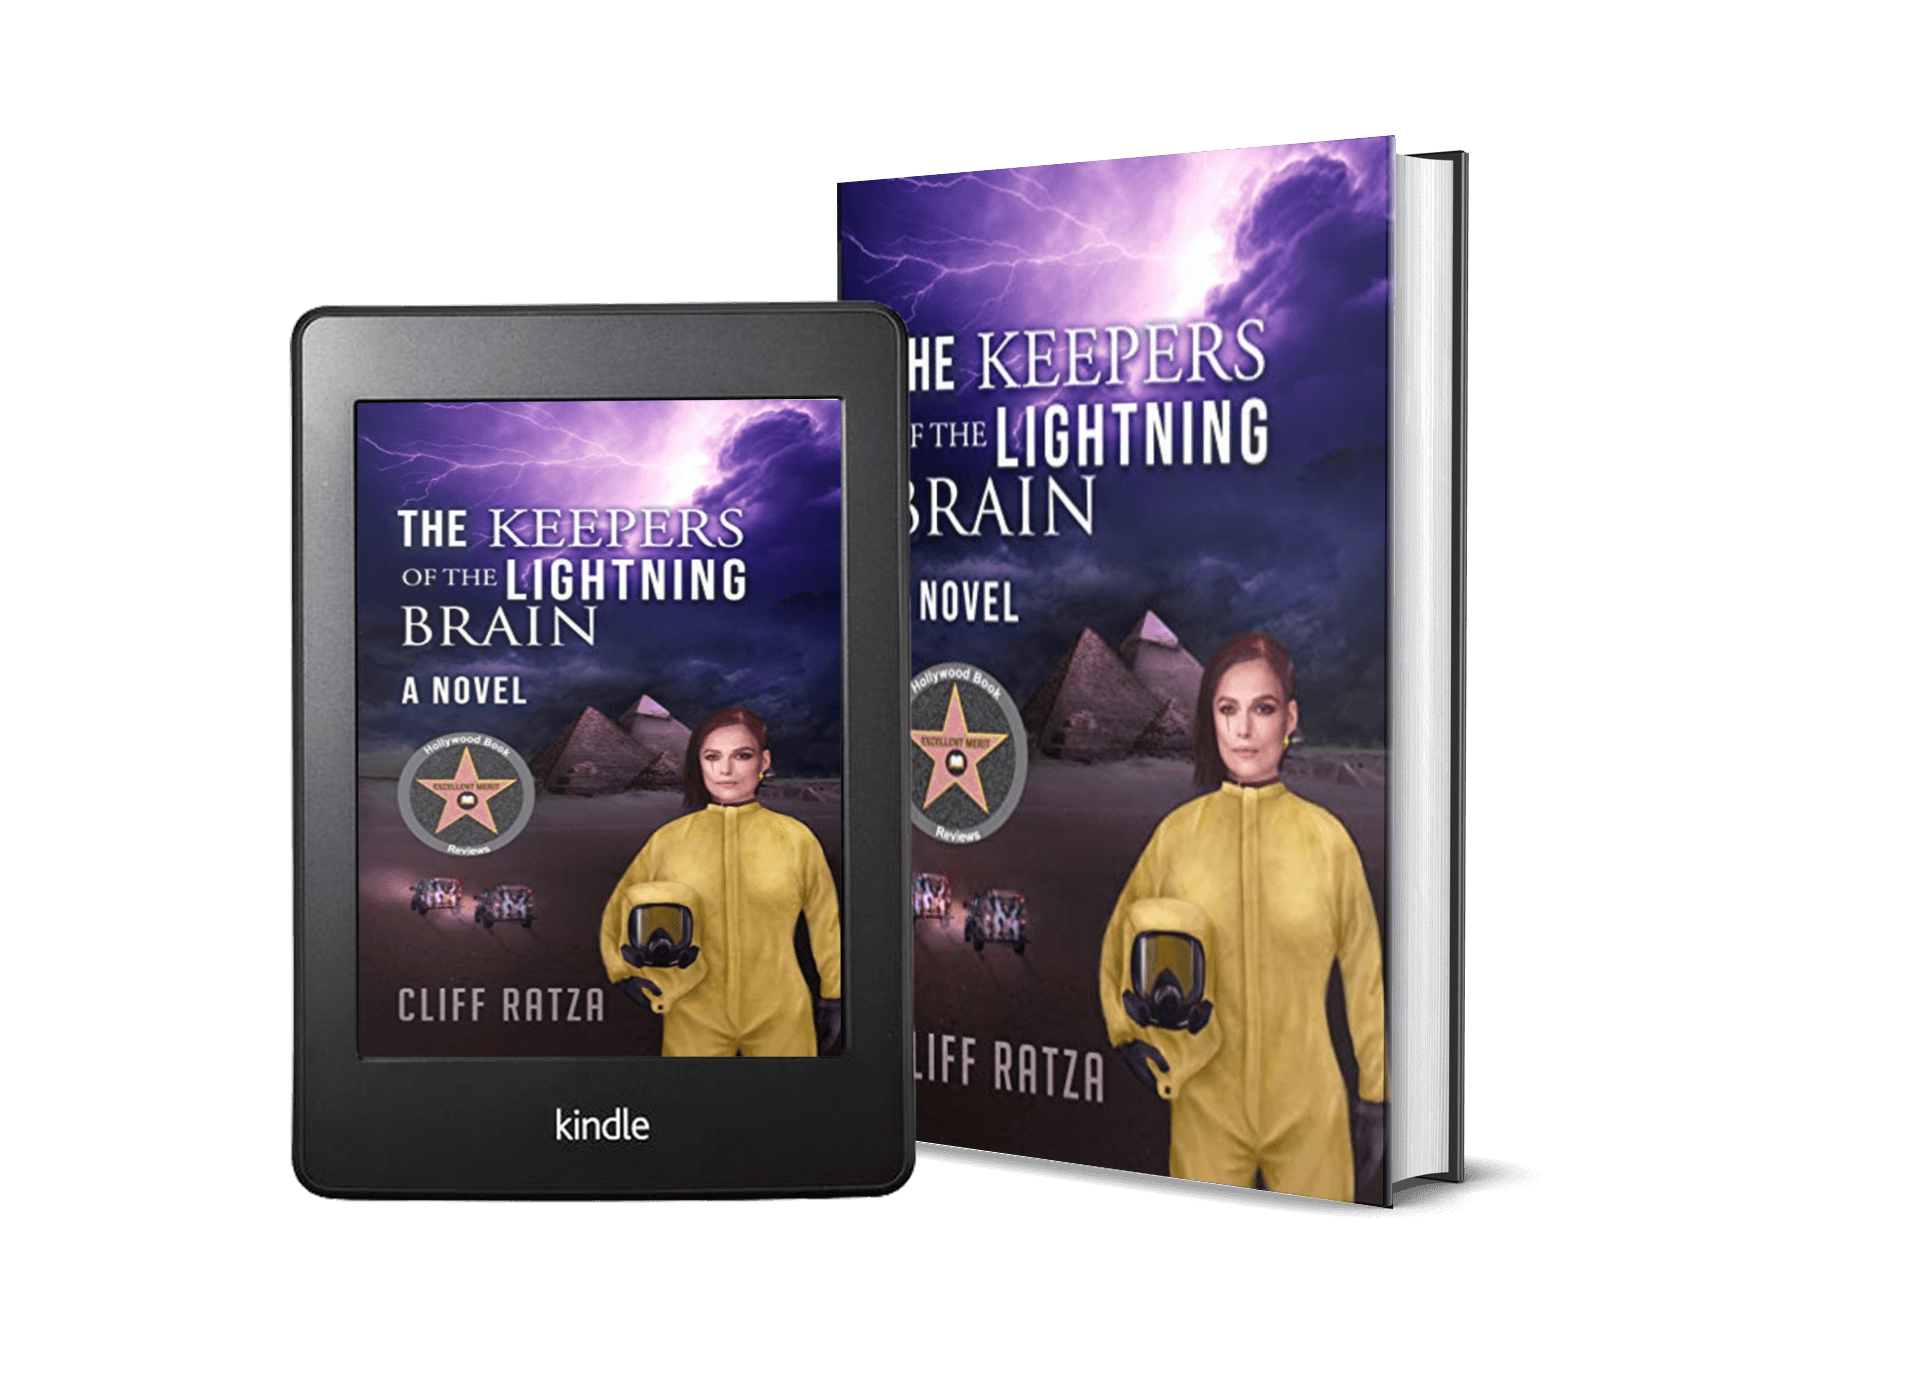 The Keepers of the Lightning Brain Novel by Cliff Ratza